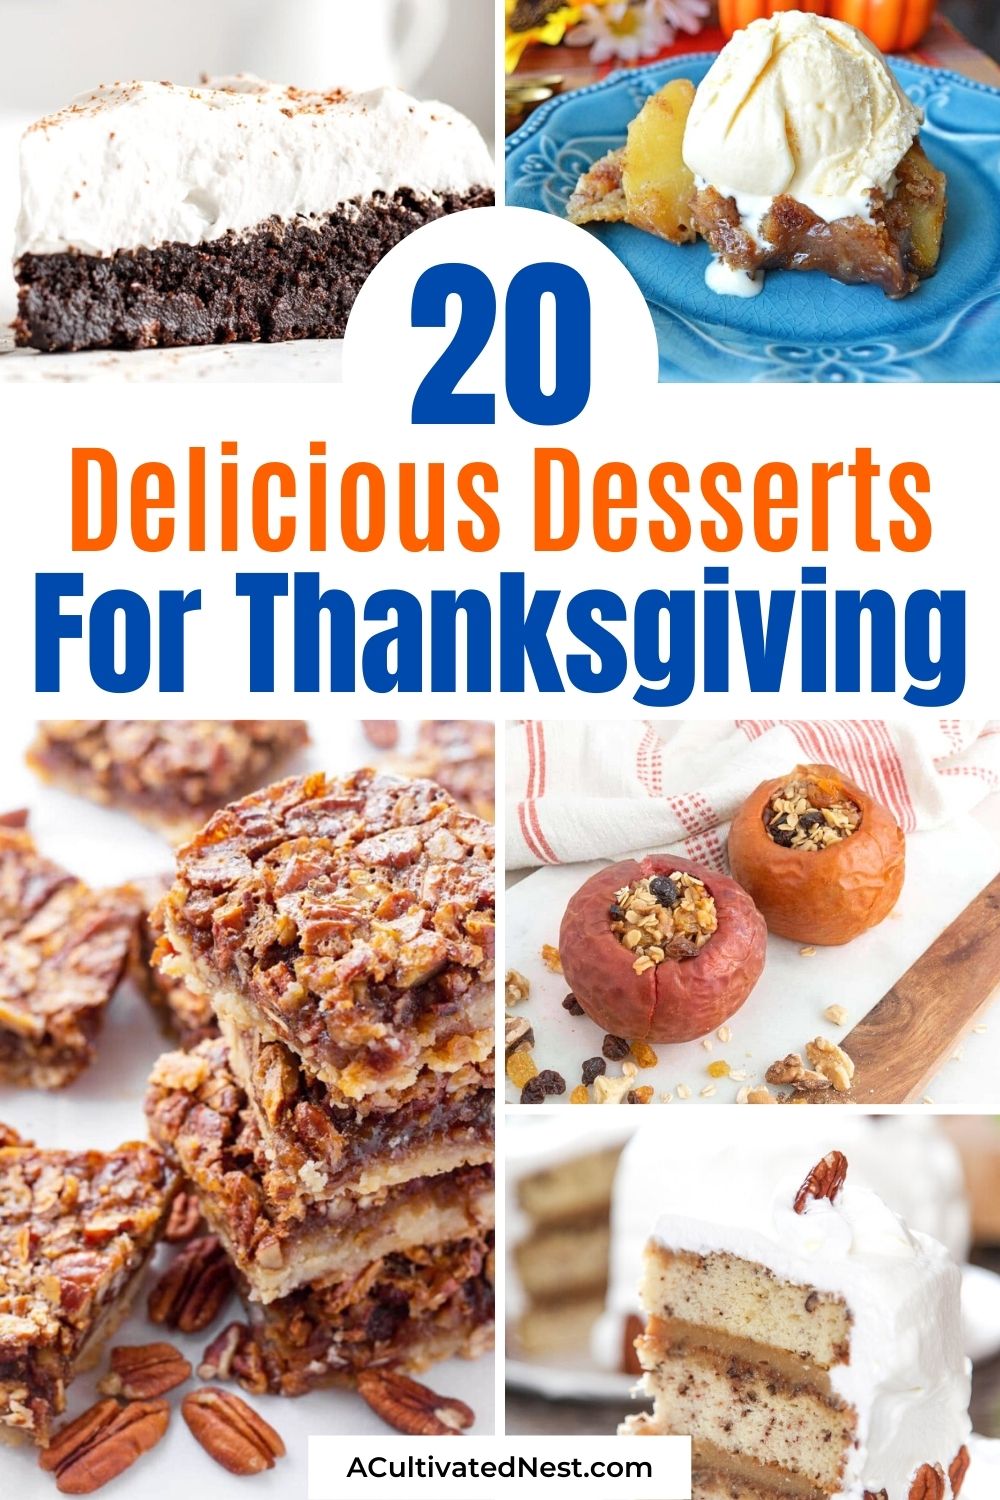 20 Delicious Thanksgiving Dessert Recipes- Have the tastiest Thanksgiving ever with some of the tasty recipes from this big list of delicious Thanksgiving desserts! There are so many recipes your family and friends are sure to love! | #ThanksgivingFood #desserts #ThanksgivingDesserts #recipes #ACultivatedNest